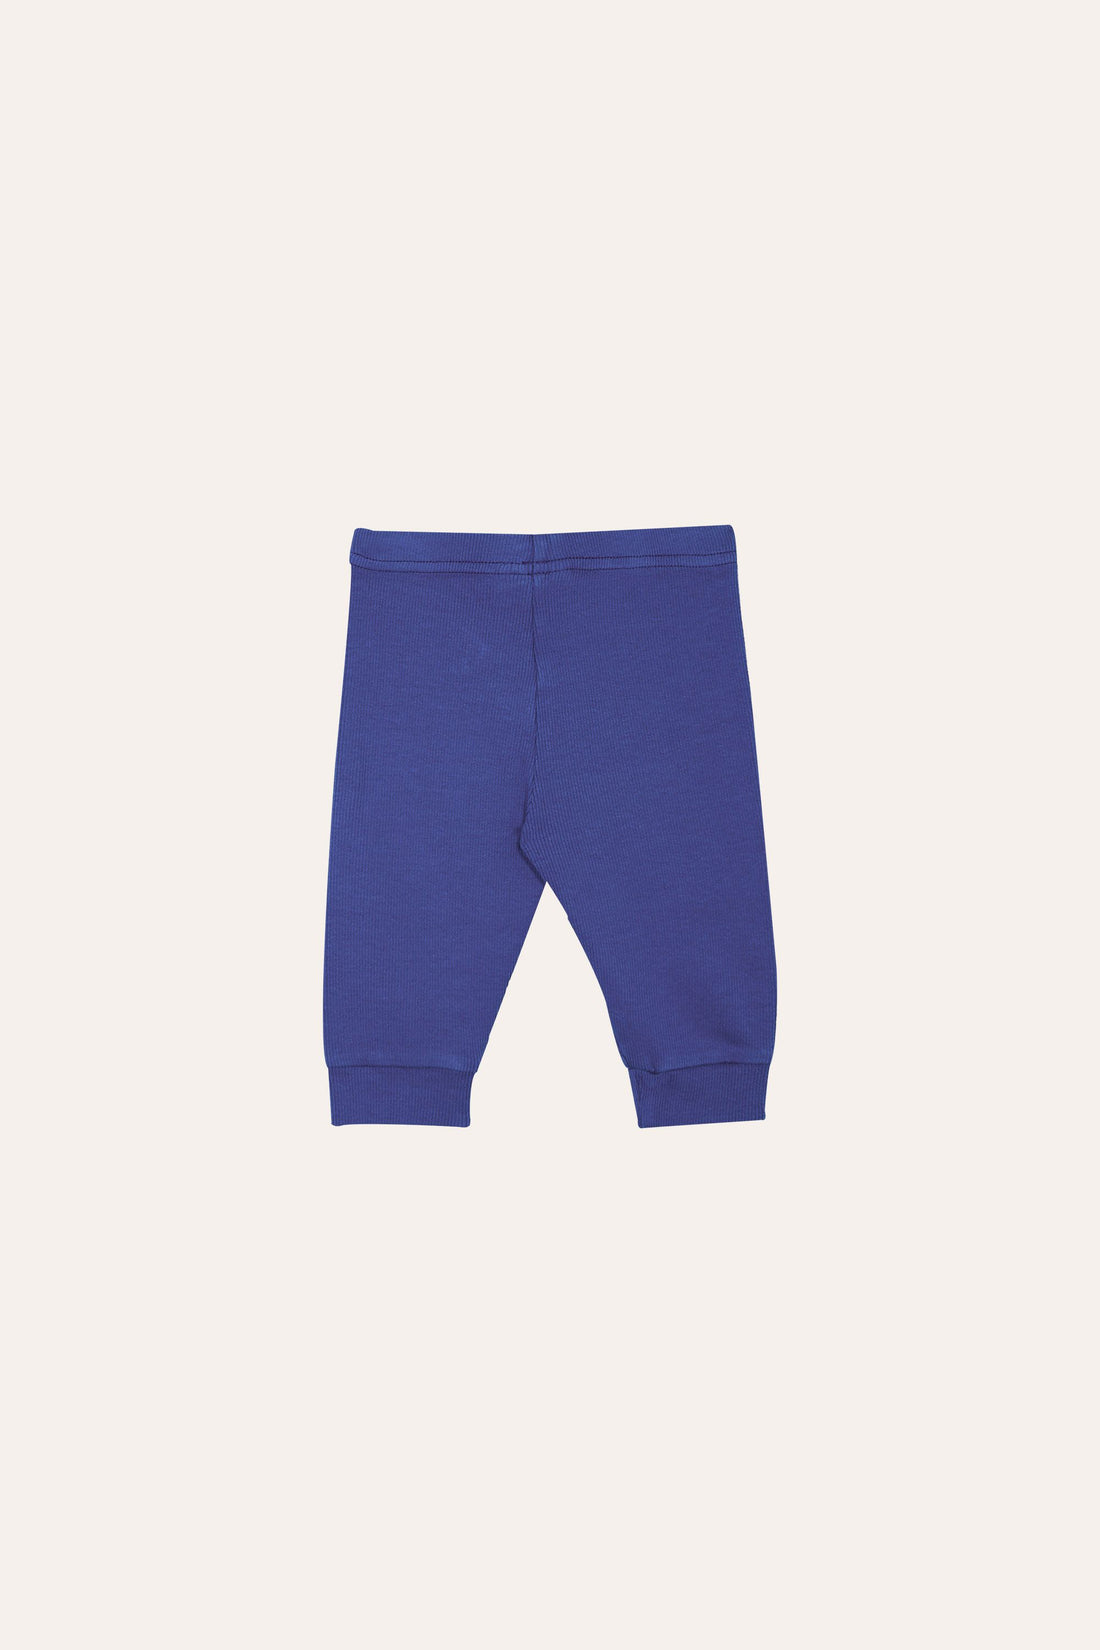 The Campamento - baby patch leggings - blue